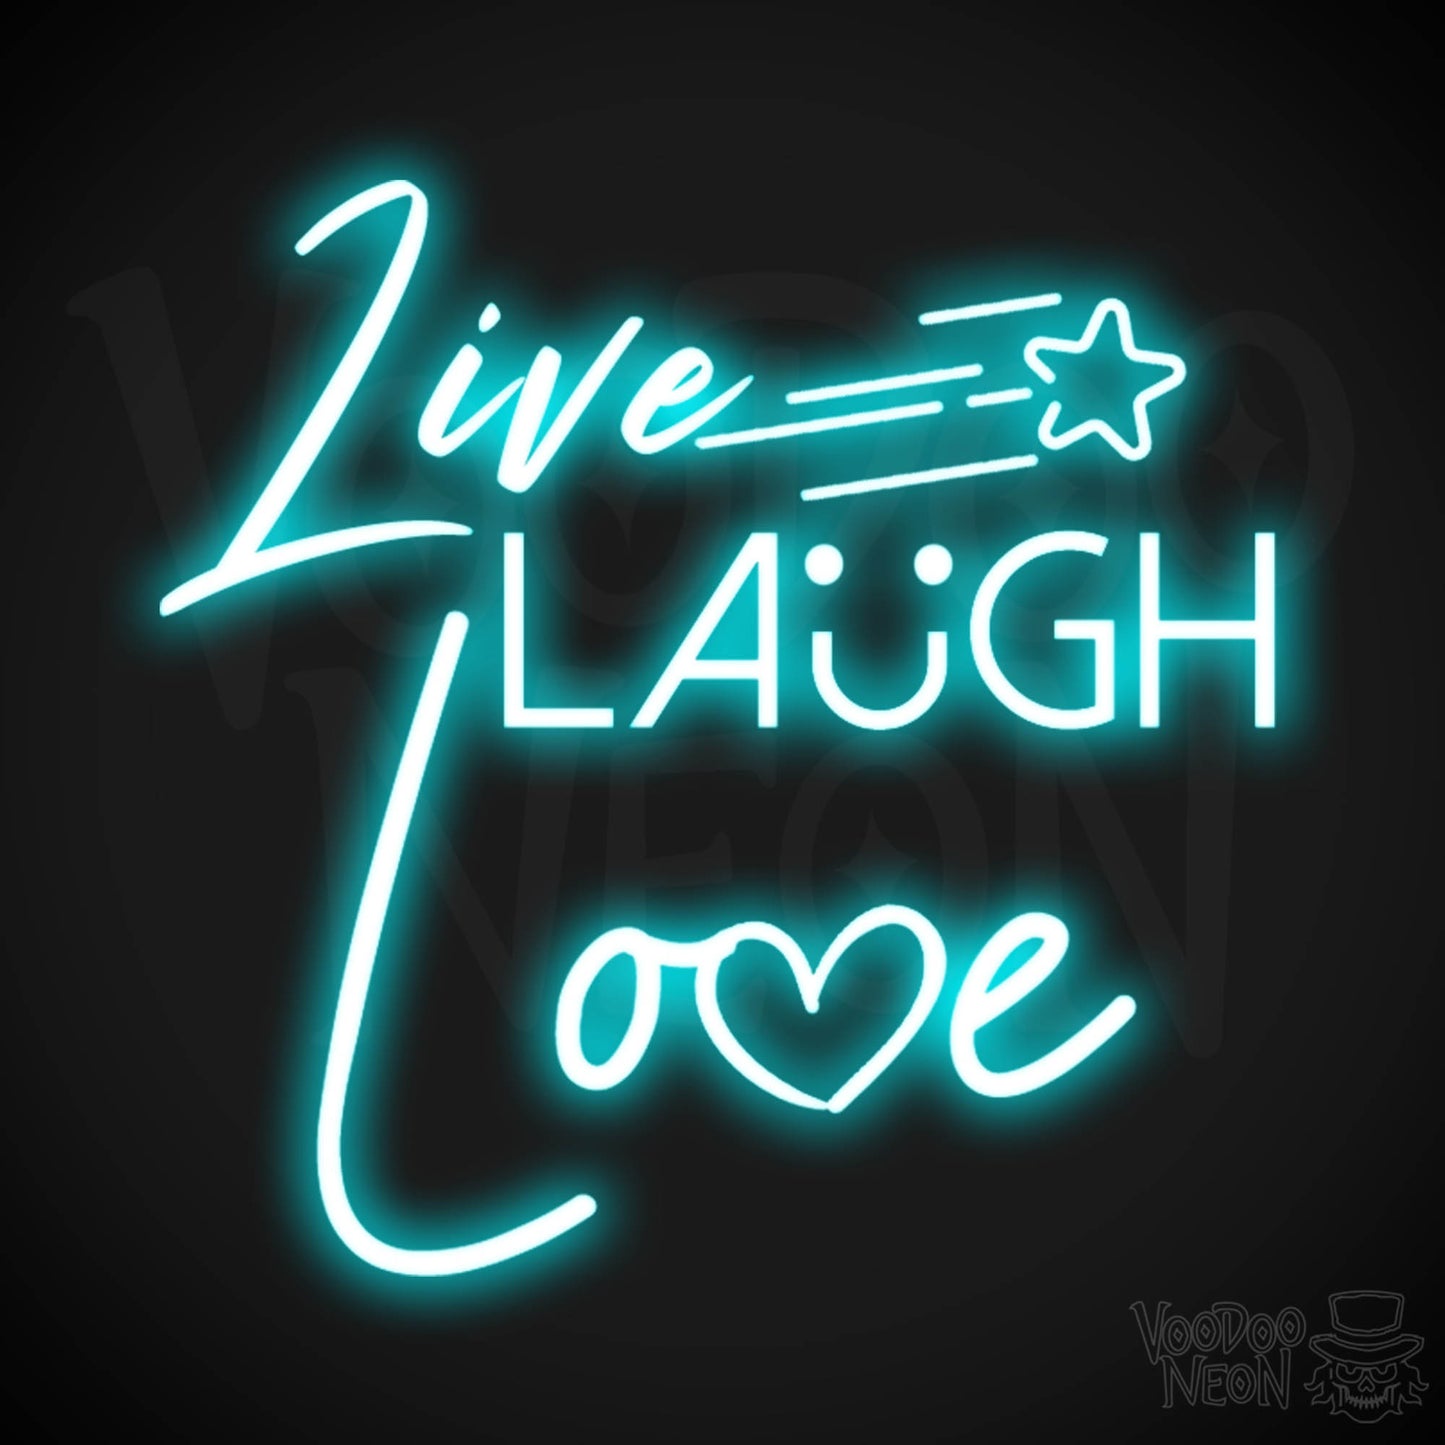 Live Laugh Love Neon Sign - Neon Live Laugh Love Sign - Wall Art - Color Ice Blue